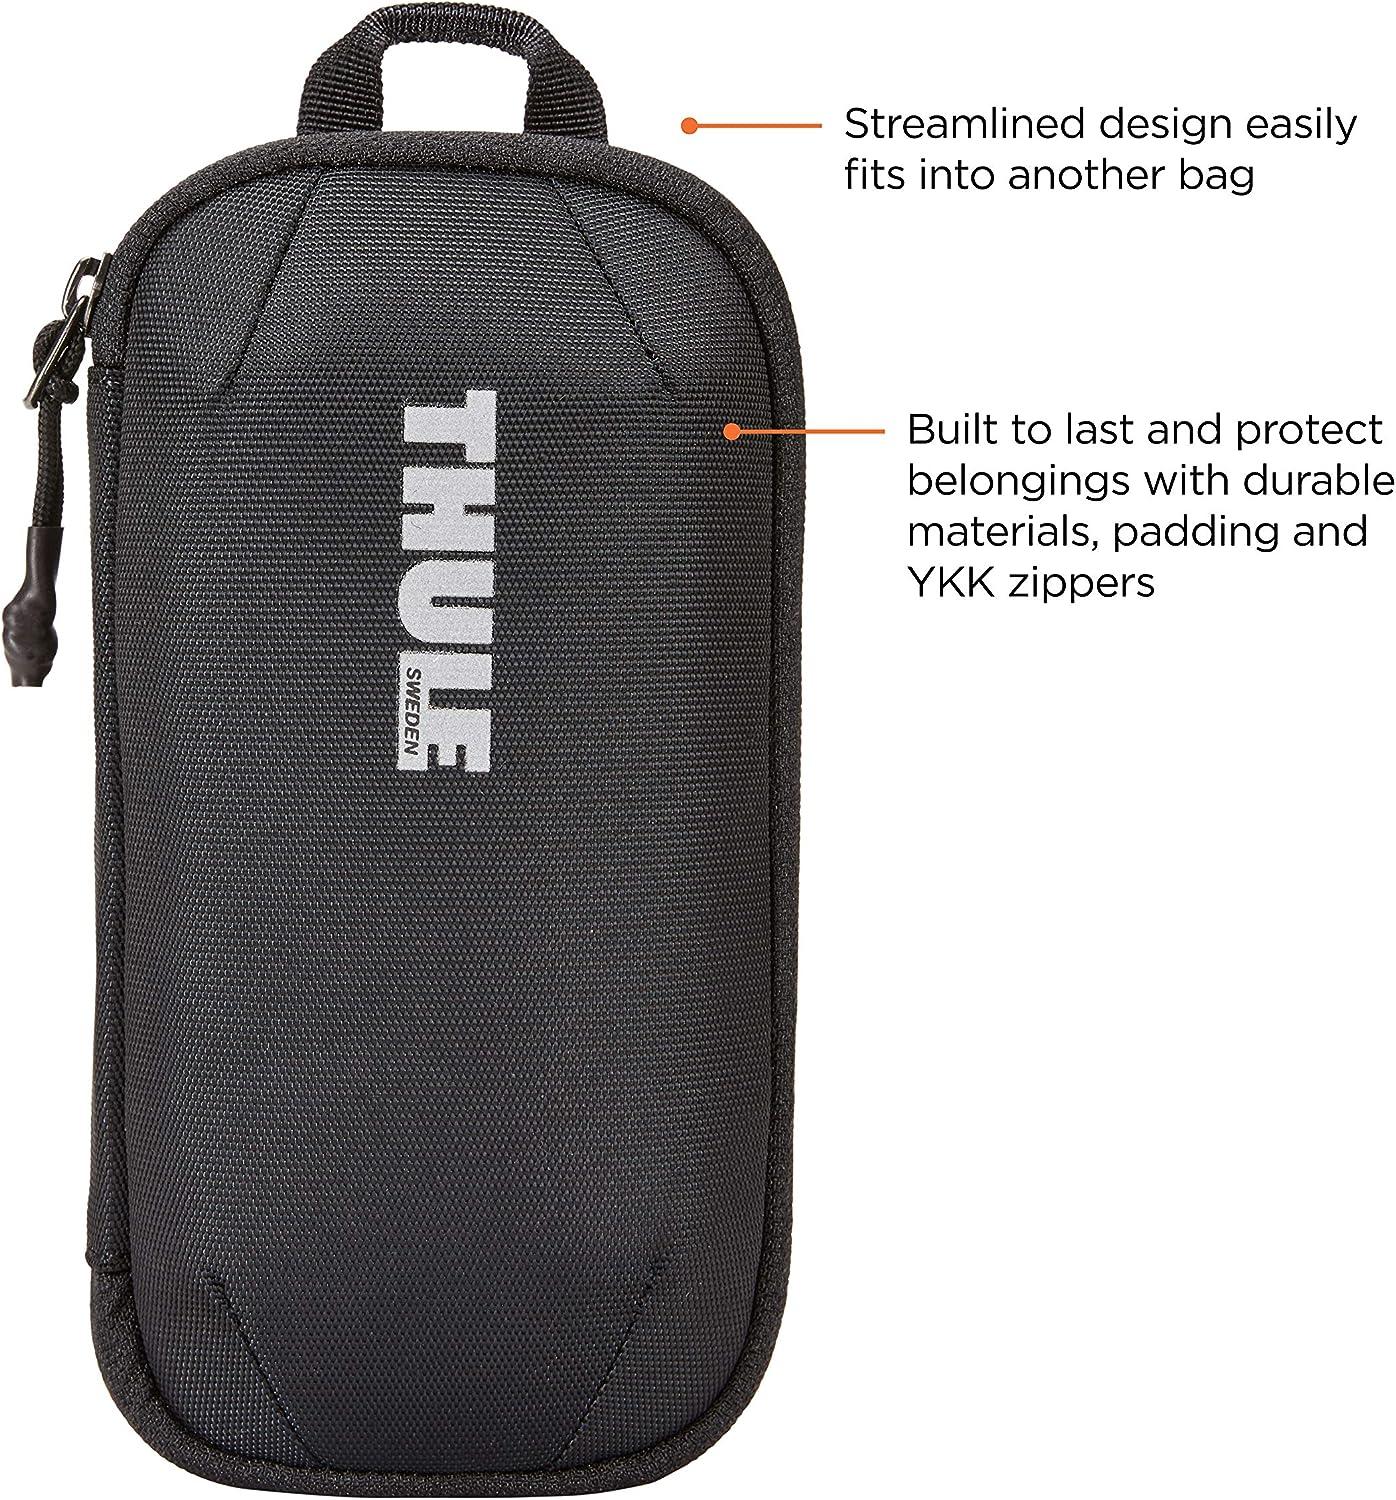 Thule showcases major updates to key products in the juvenile